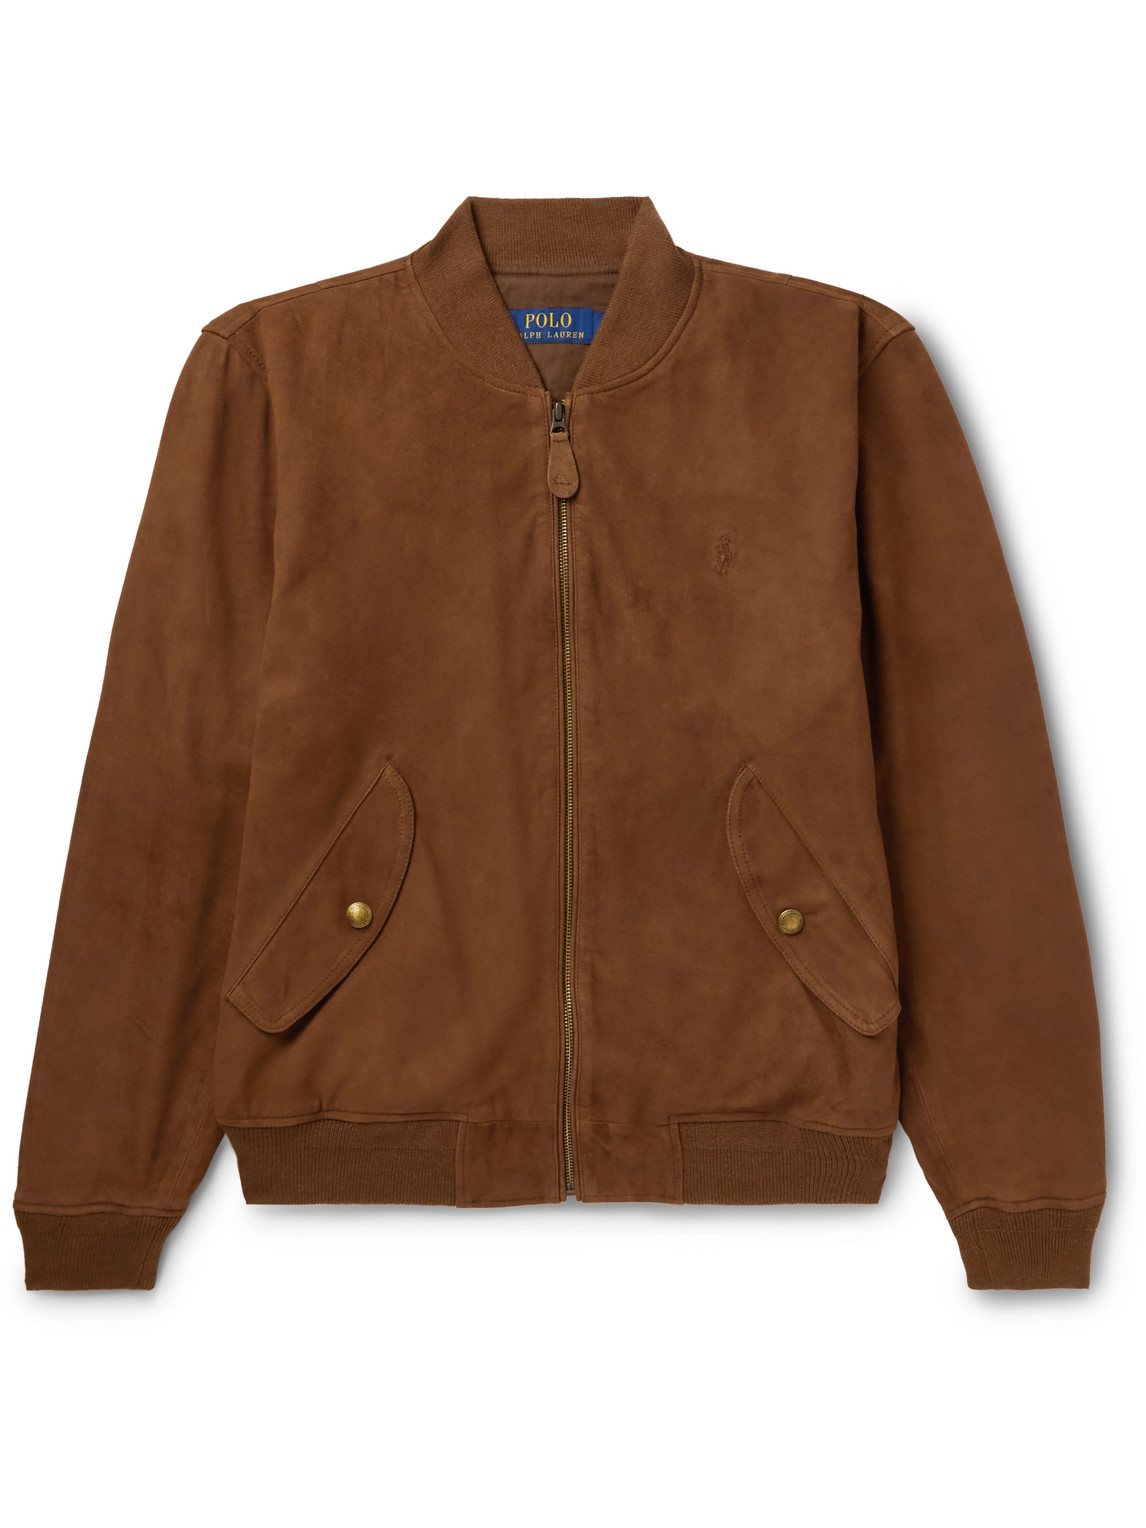 Polo Ralph Lauren Gunners Suede Bomber Jacket In Country Brown | ModeSens